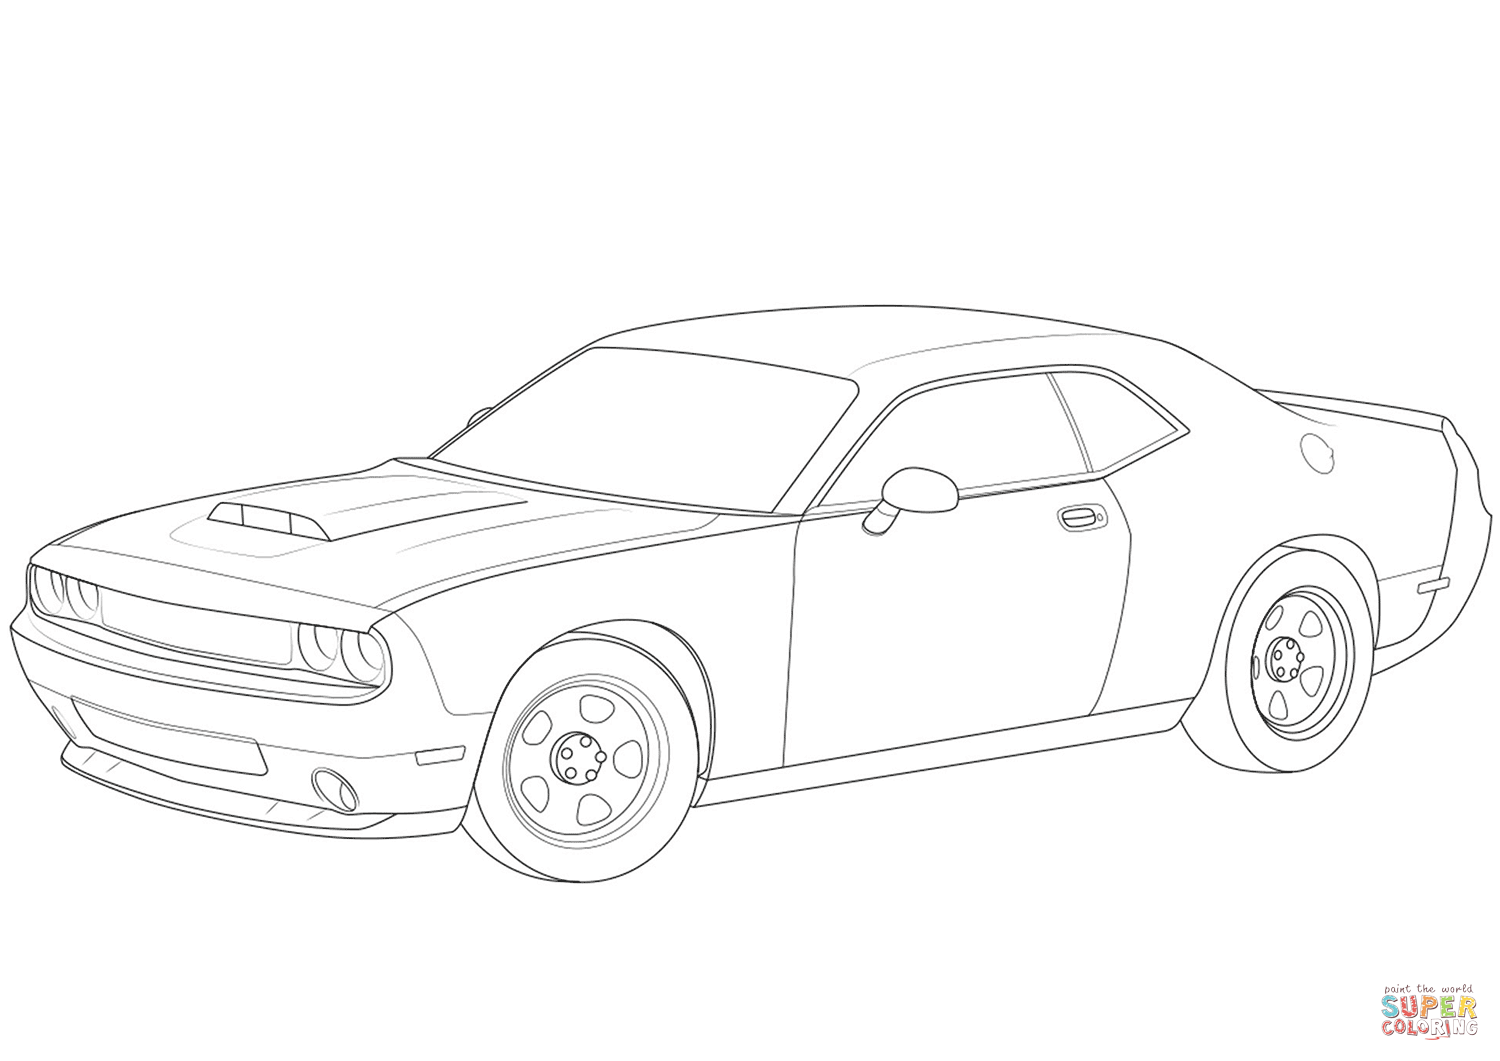 Dodge challenger coloring page free printable coloring pages